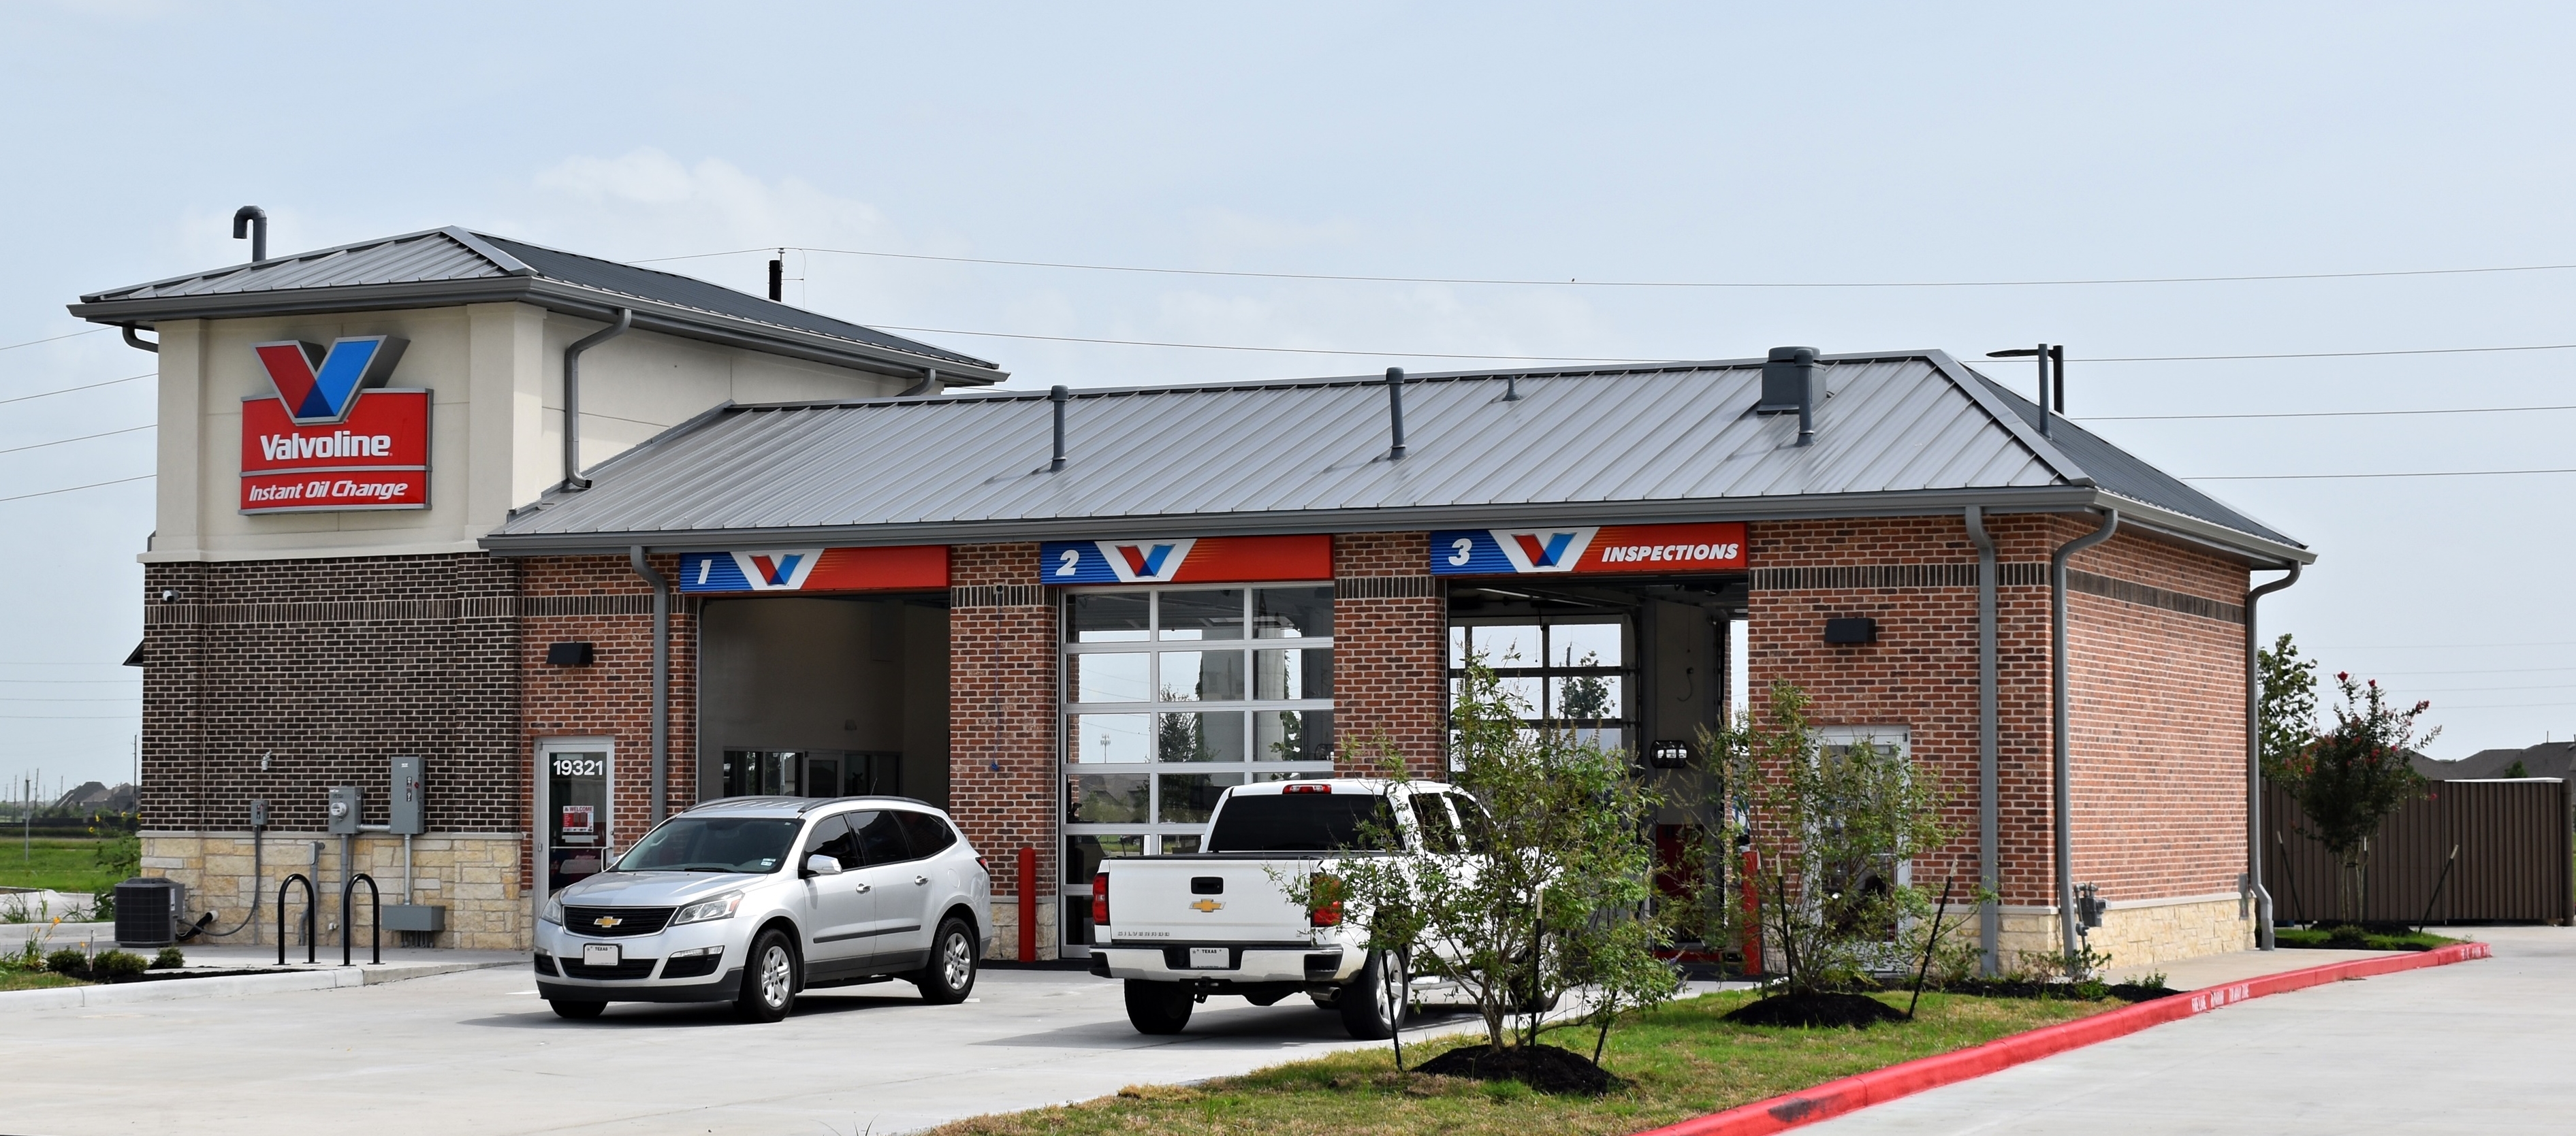 Valvoline in Richmond, TX ground-up construction by Westwood Contractors